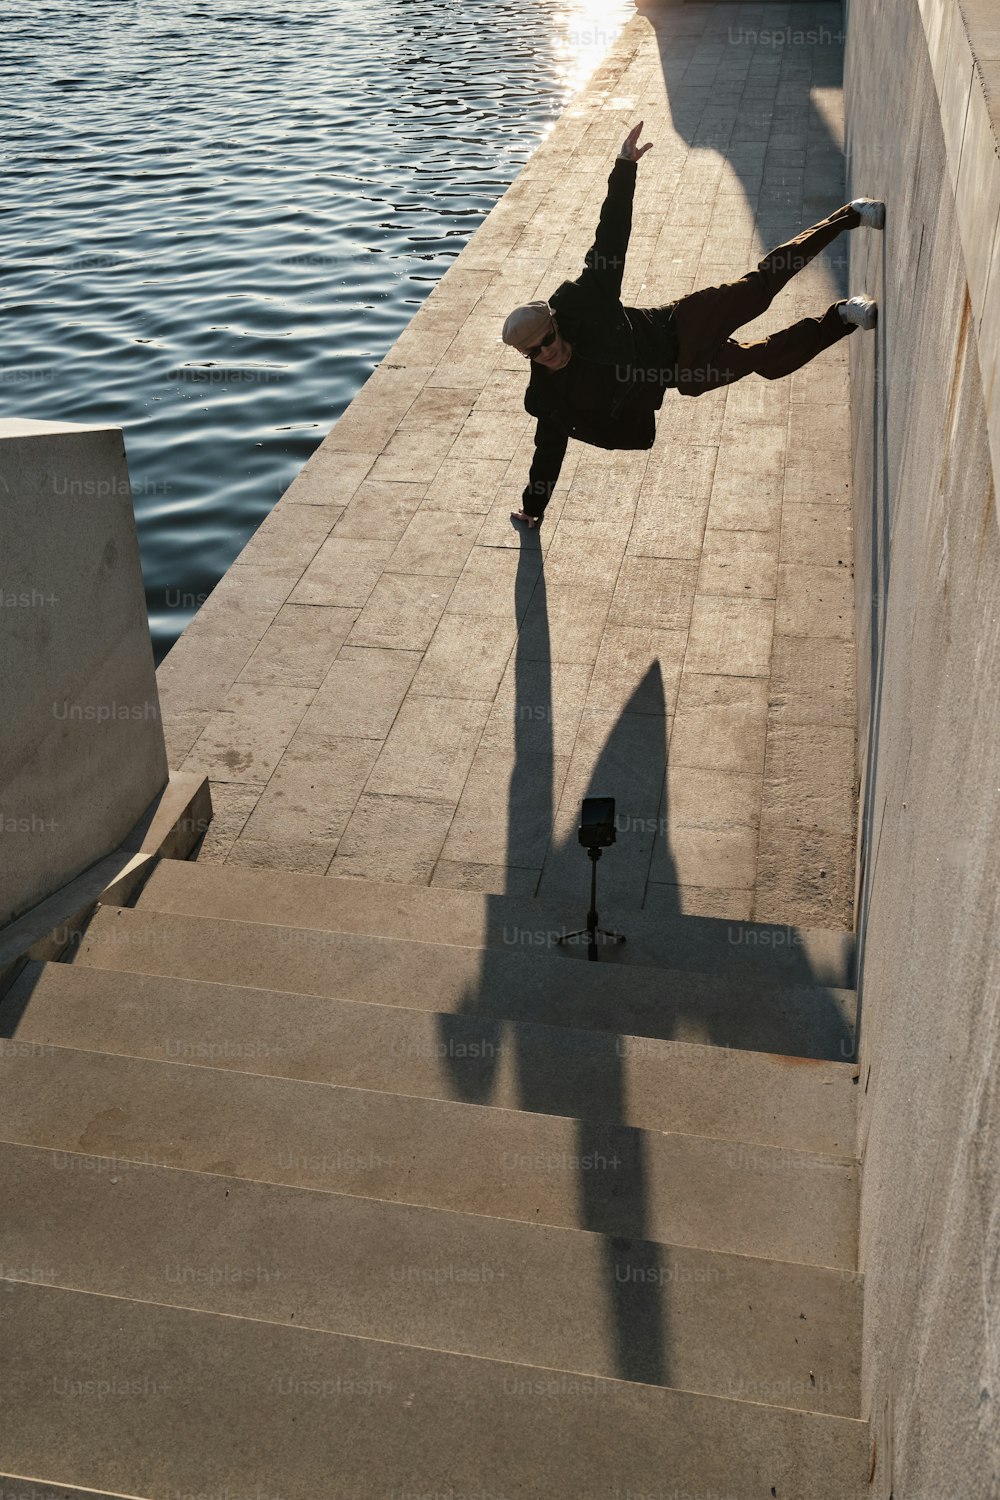 a man doing a trick on a skateboard down a flight of stairs